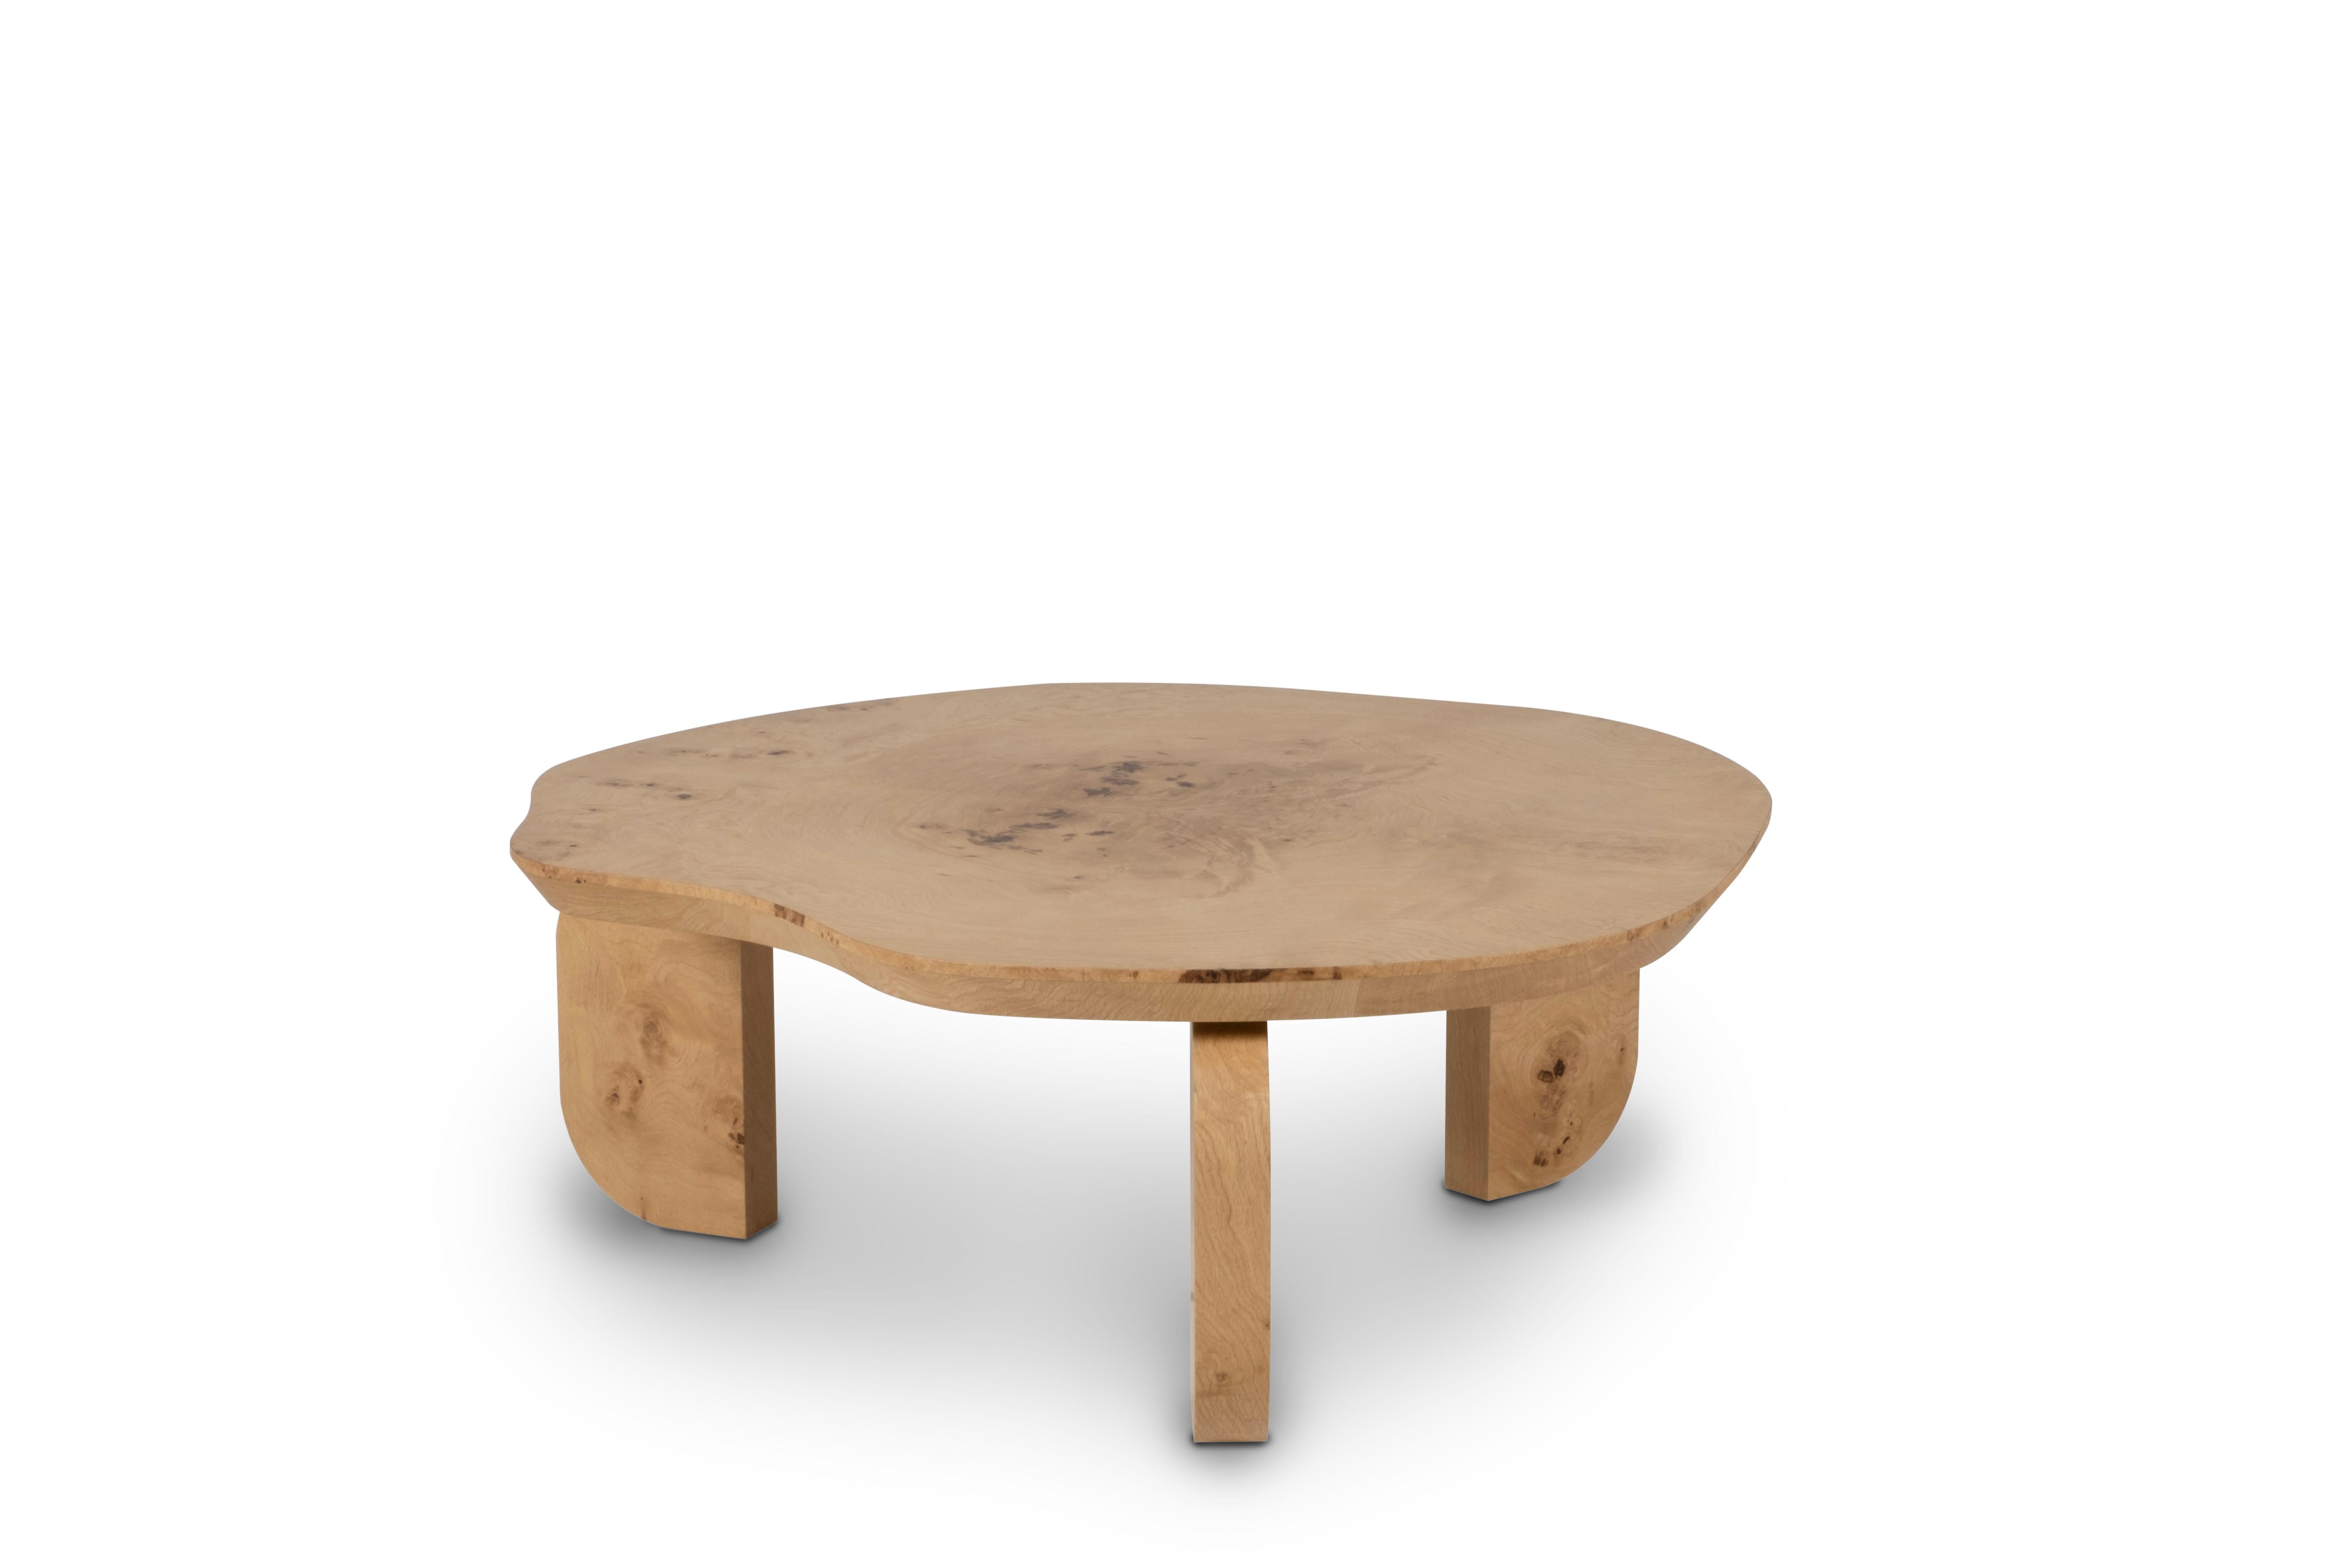 Dornes Coffee Table, Contemporary Collection, Handcrafted in Portugal - Europe by Greenapple.

Rendering the Silhouette of a small Portuguese village, Dornes, this side table is a representation of the stunning landscapes and historical heritage of